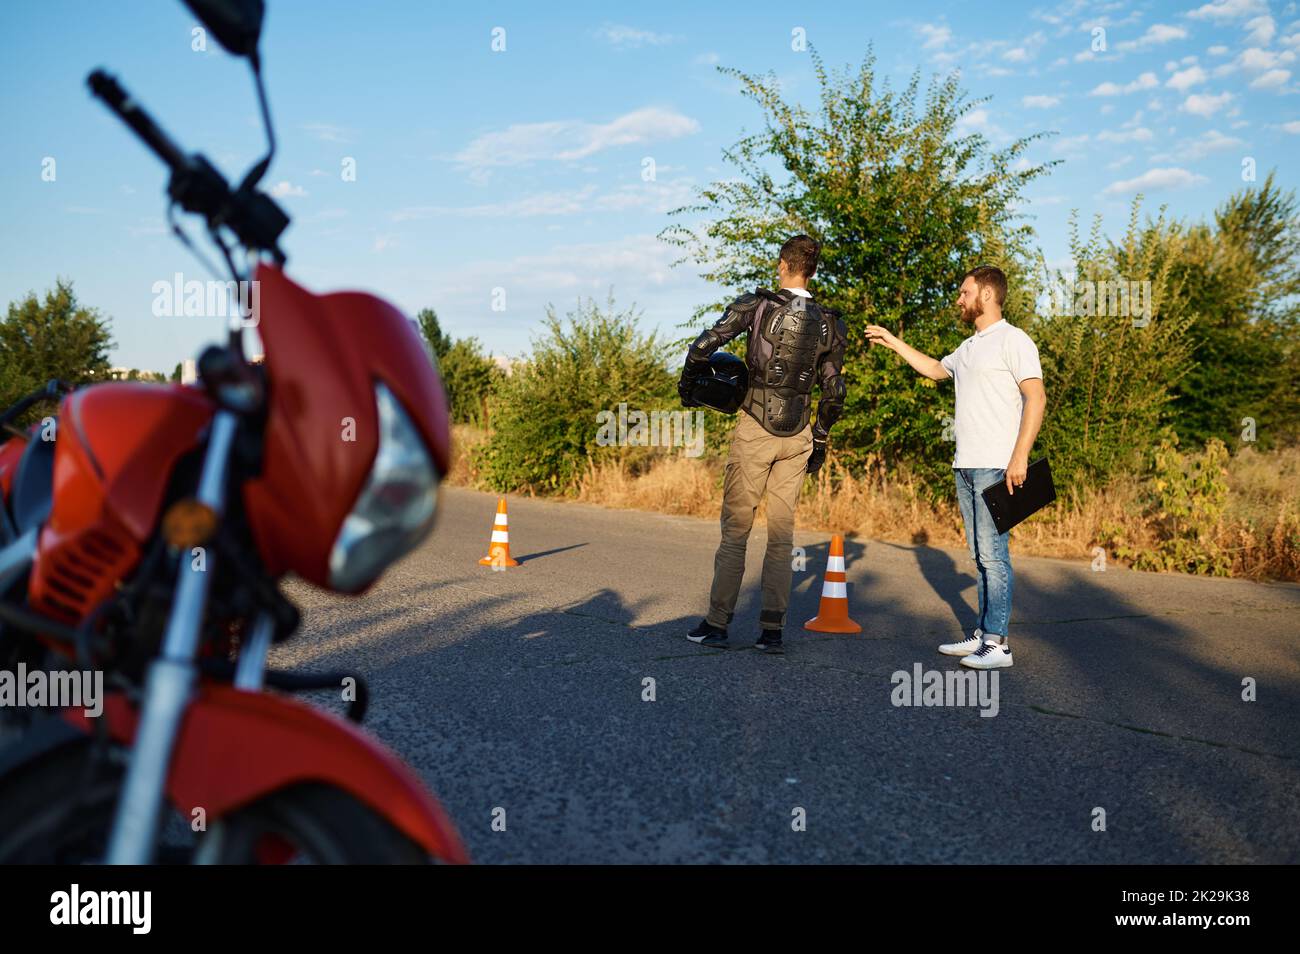 Motorbike, driving course, motorcycle school Stock Photo